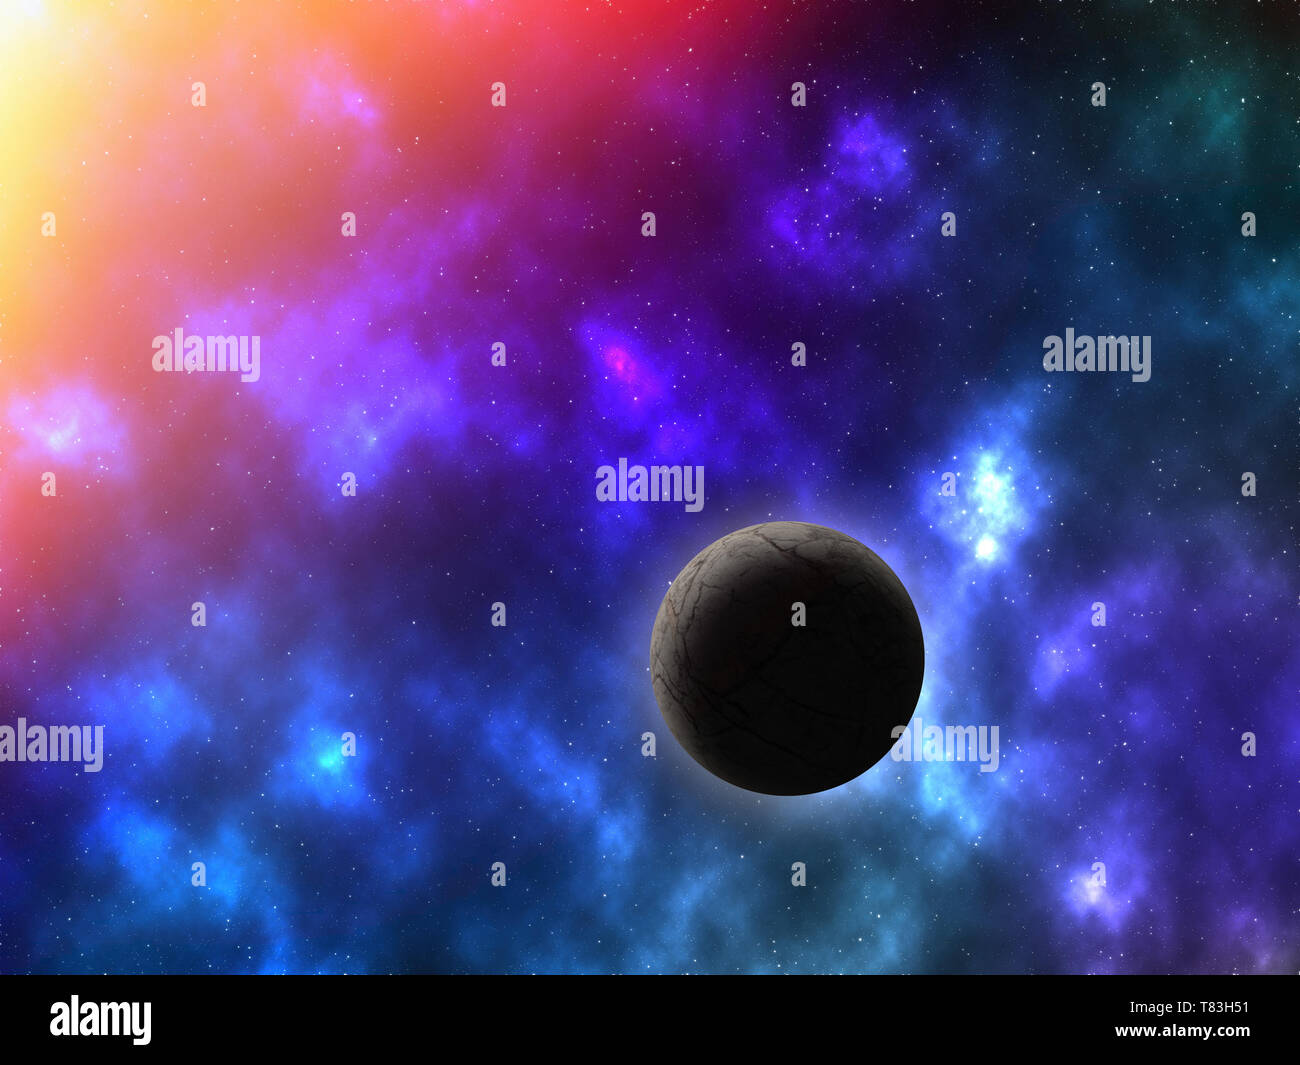 planet in space background illustration Stock Photo